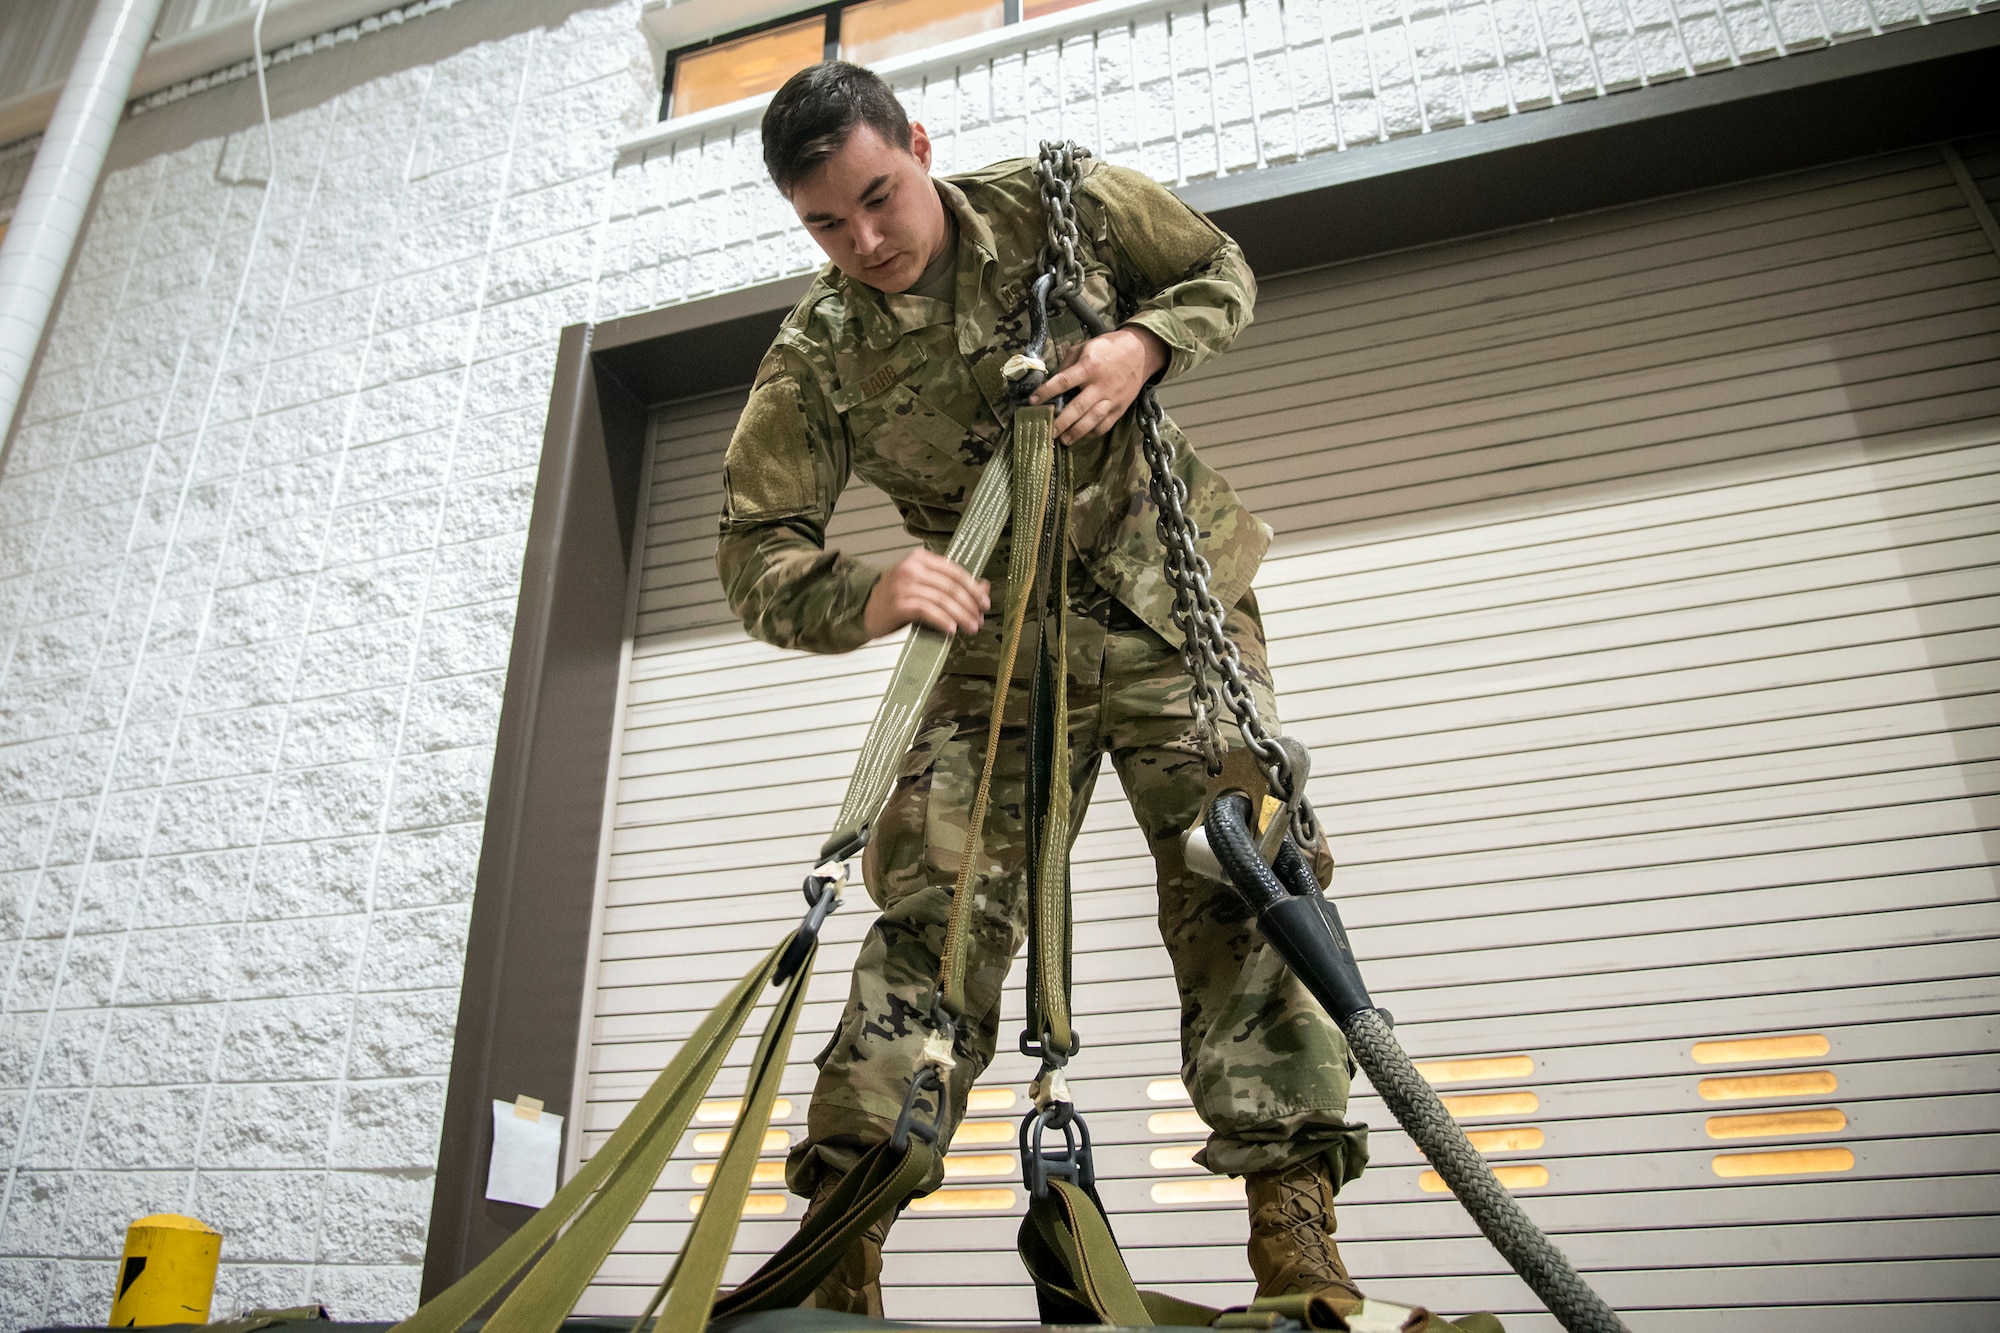 Senior Airman Jarod Barr, 23d Security Forces Squadron installation patrolman, inspects the sling load components of an 822 cargo bag during an Army Air Assault Assessment (AAA), Jan. 29, 2019, at Moody Air Force Base, Ga. Airmen were required to identify structural deficiencies on the sling load portion of the cargo bag as part of an overall assessment to determine their readiness to attend Army Air Assault School. (U.S. Air Force photo by Airman First Class Eugene Oliver)